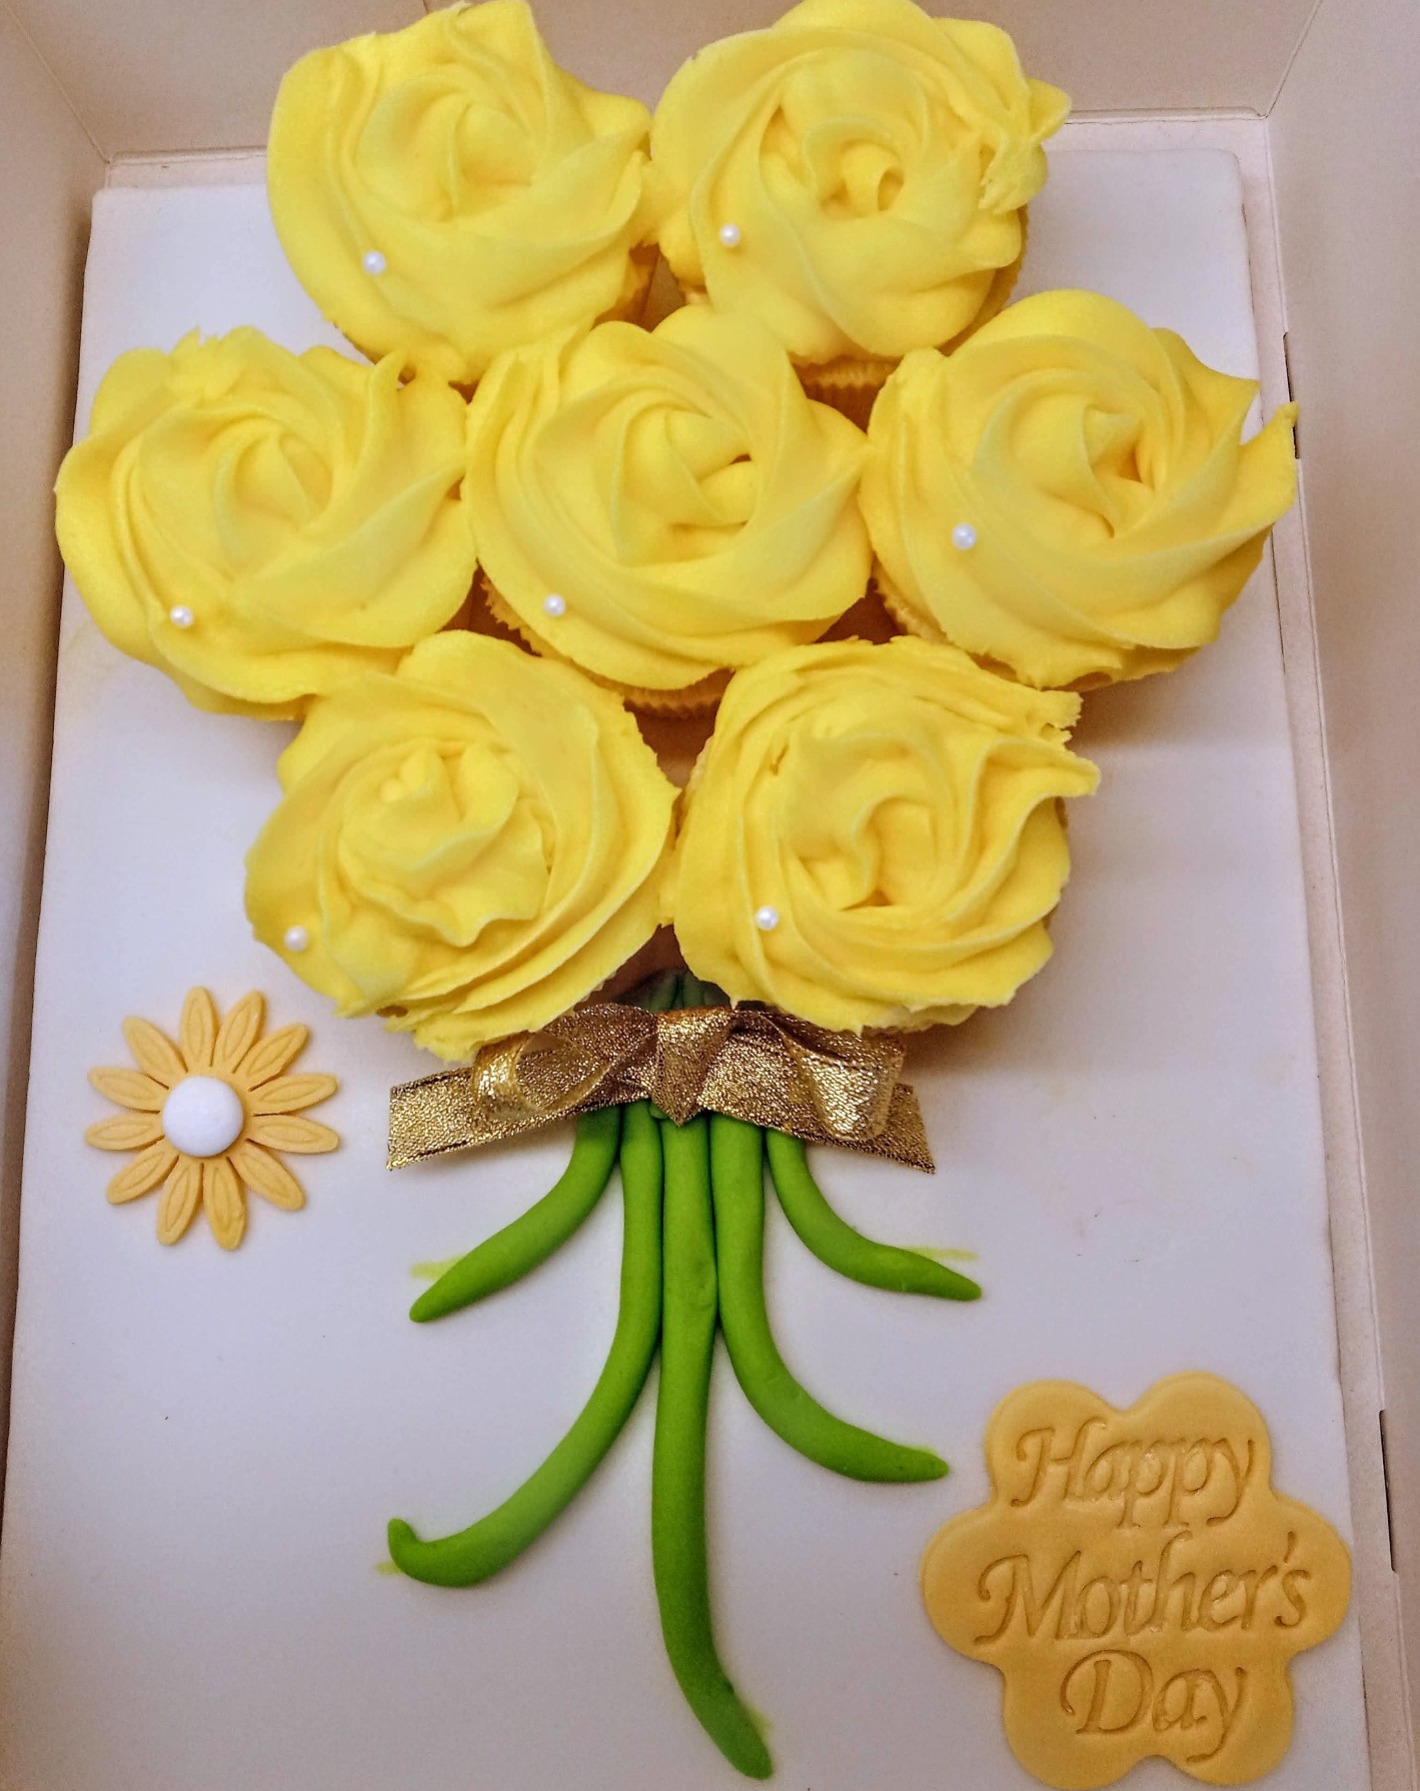 Mothers day cupcake bouquet - in yellow or pink design